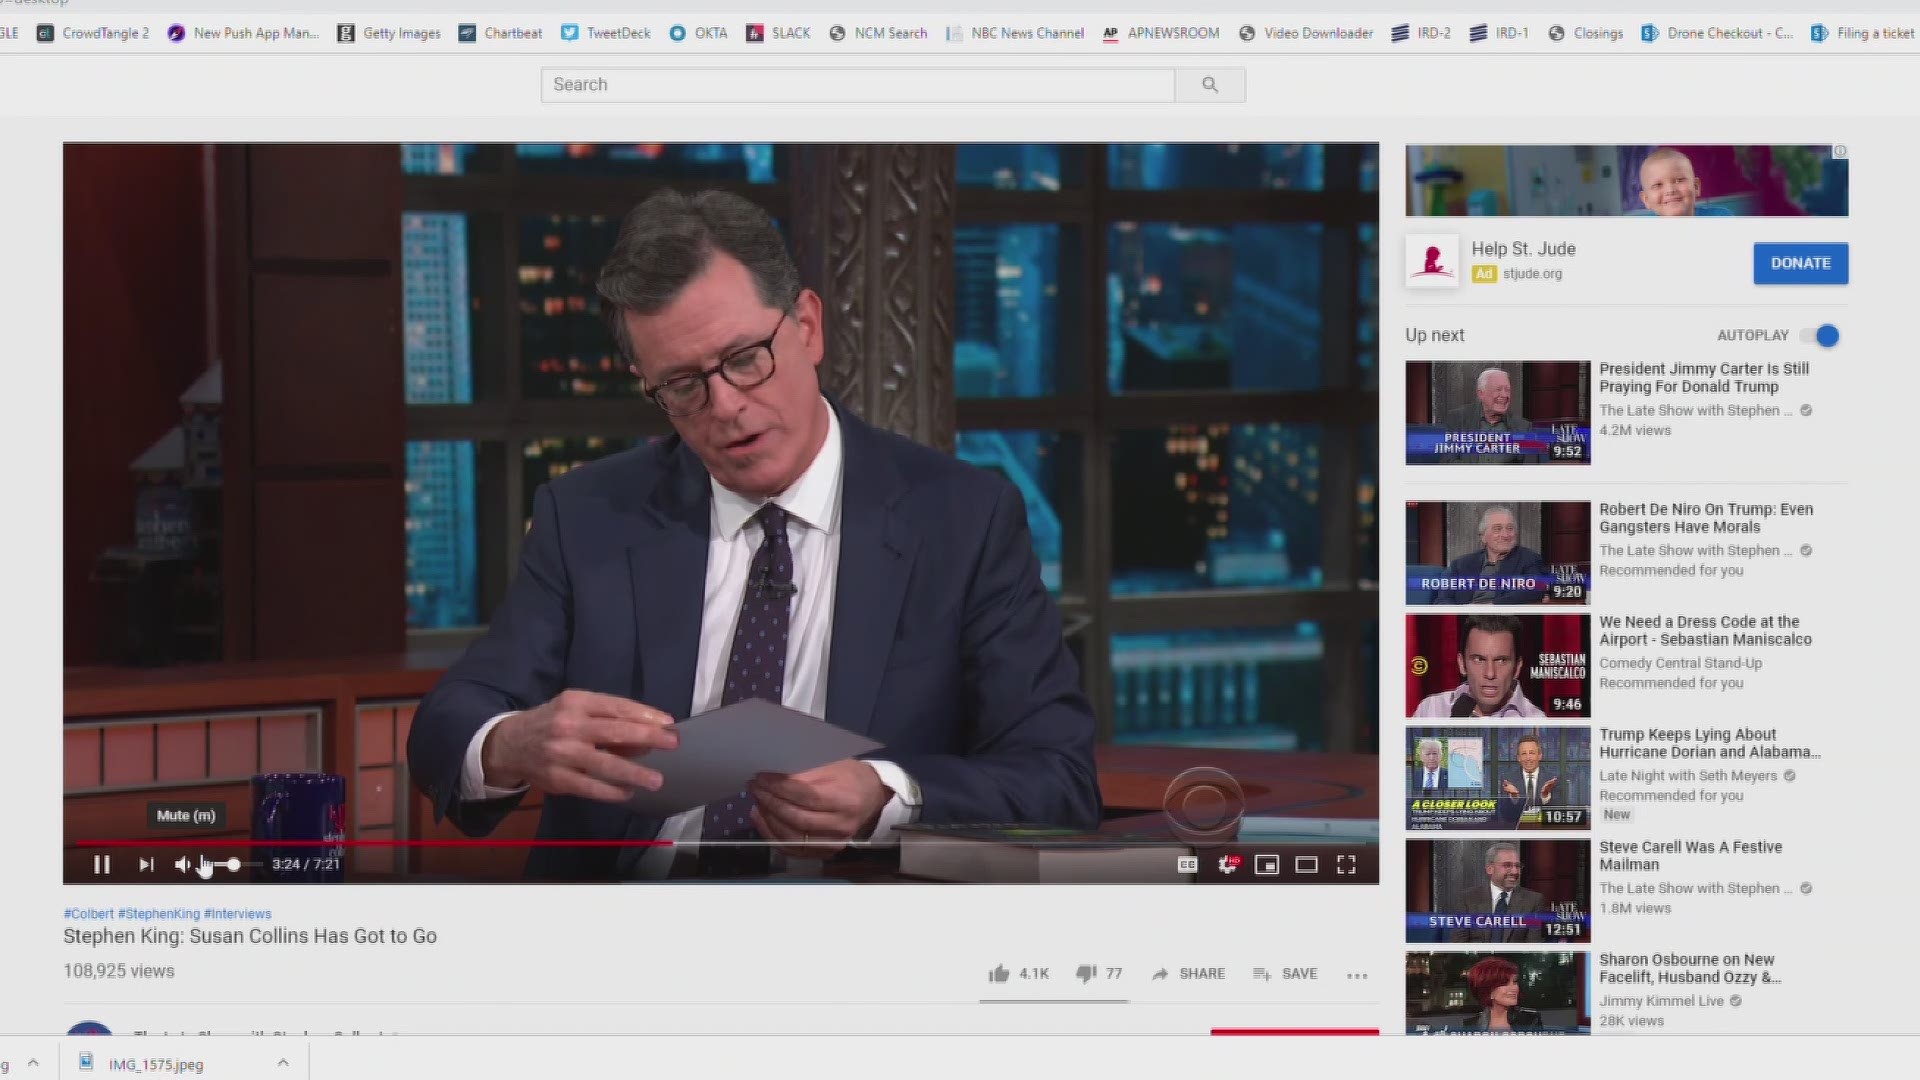 Stephen King on Late Show with Stephen Colbert.